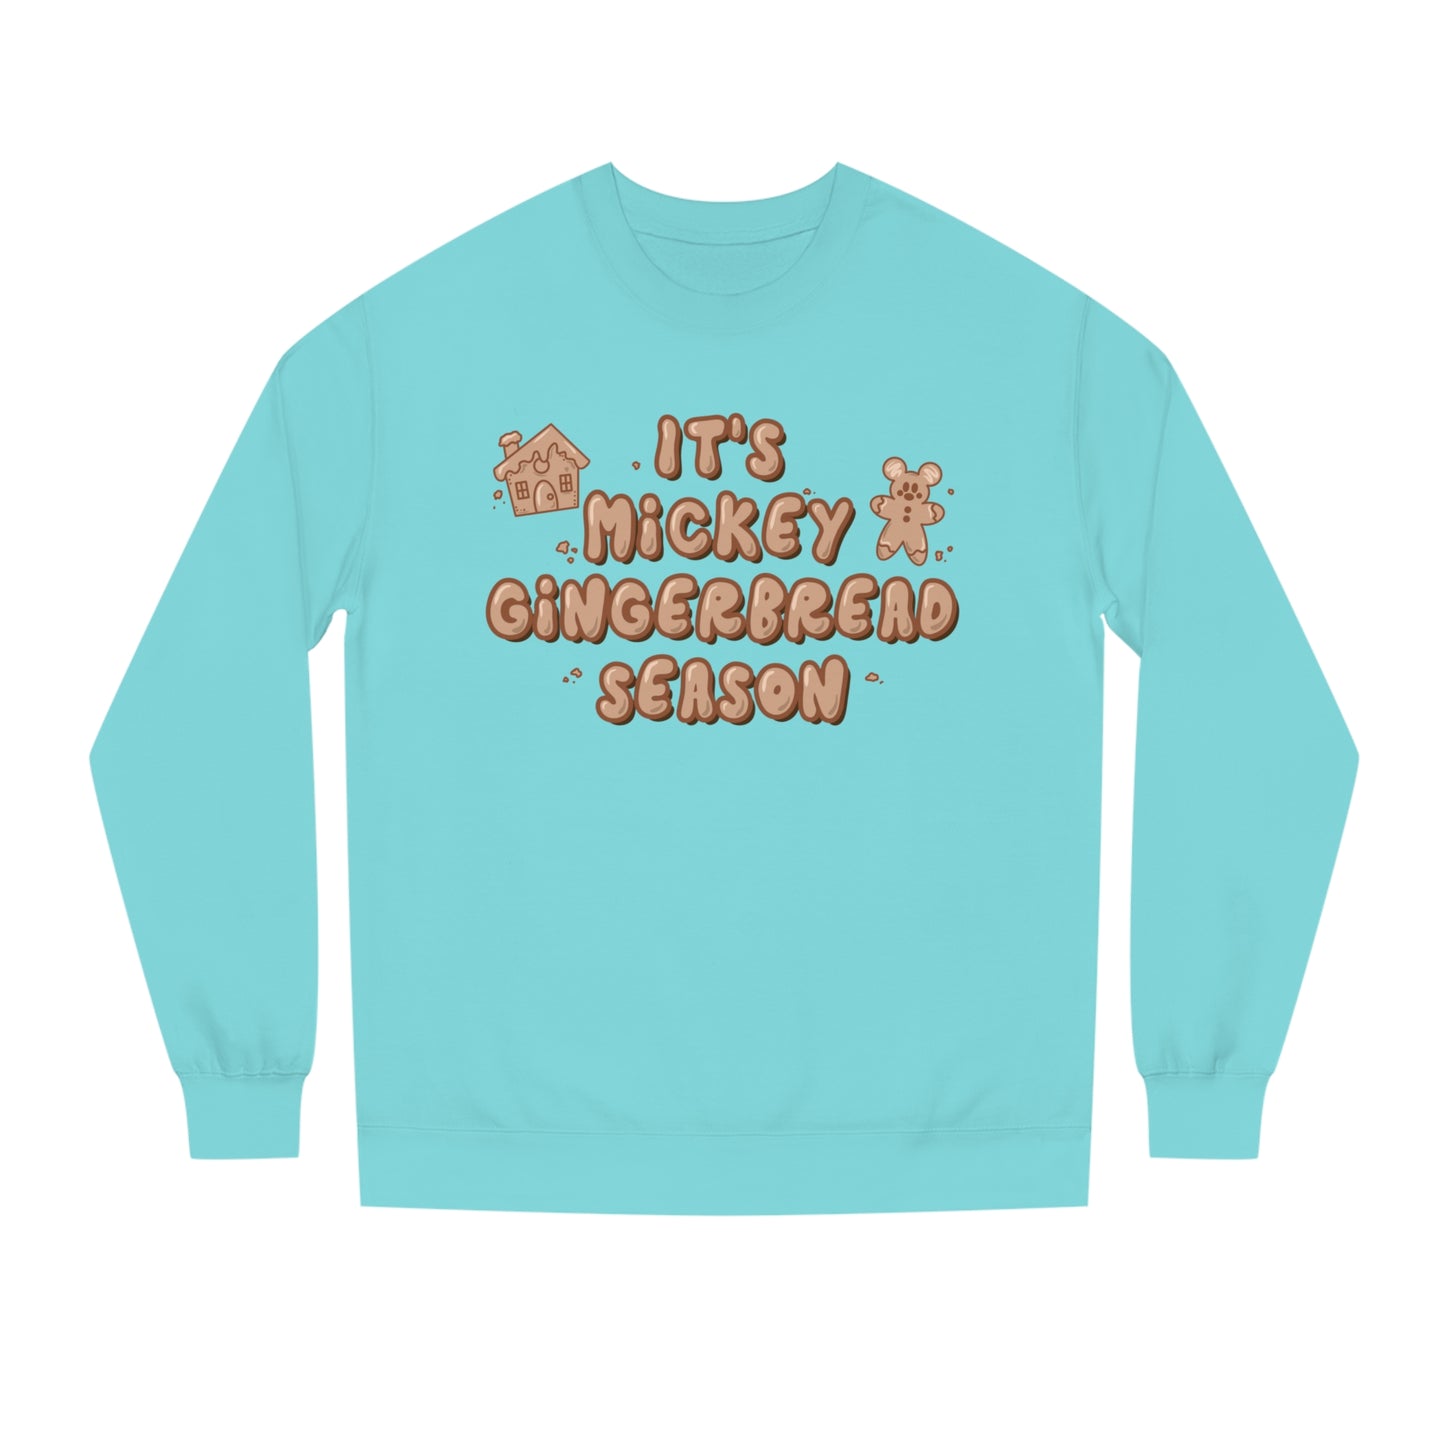 Adult Gingerbread Season Crewneck - Independent Trading Co.